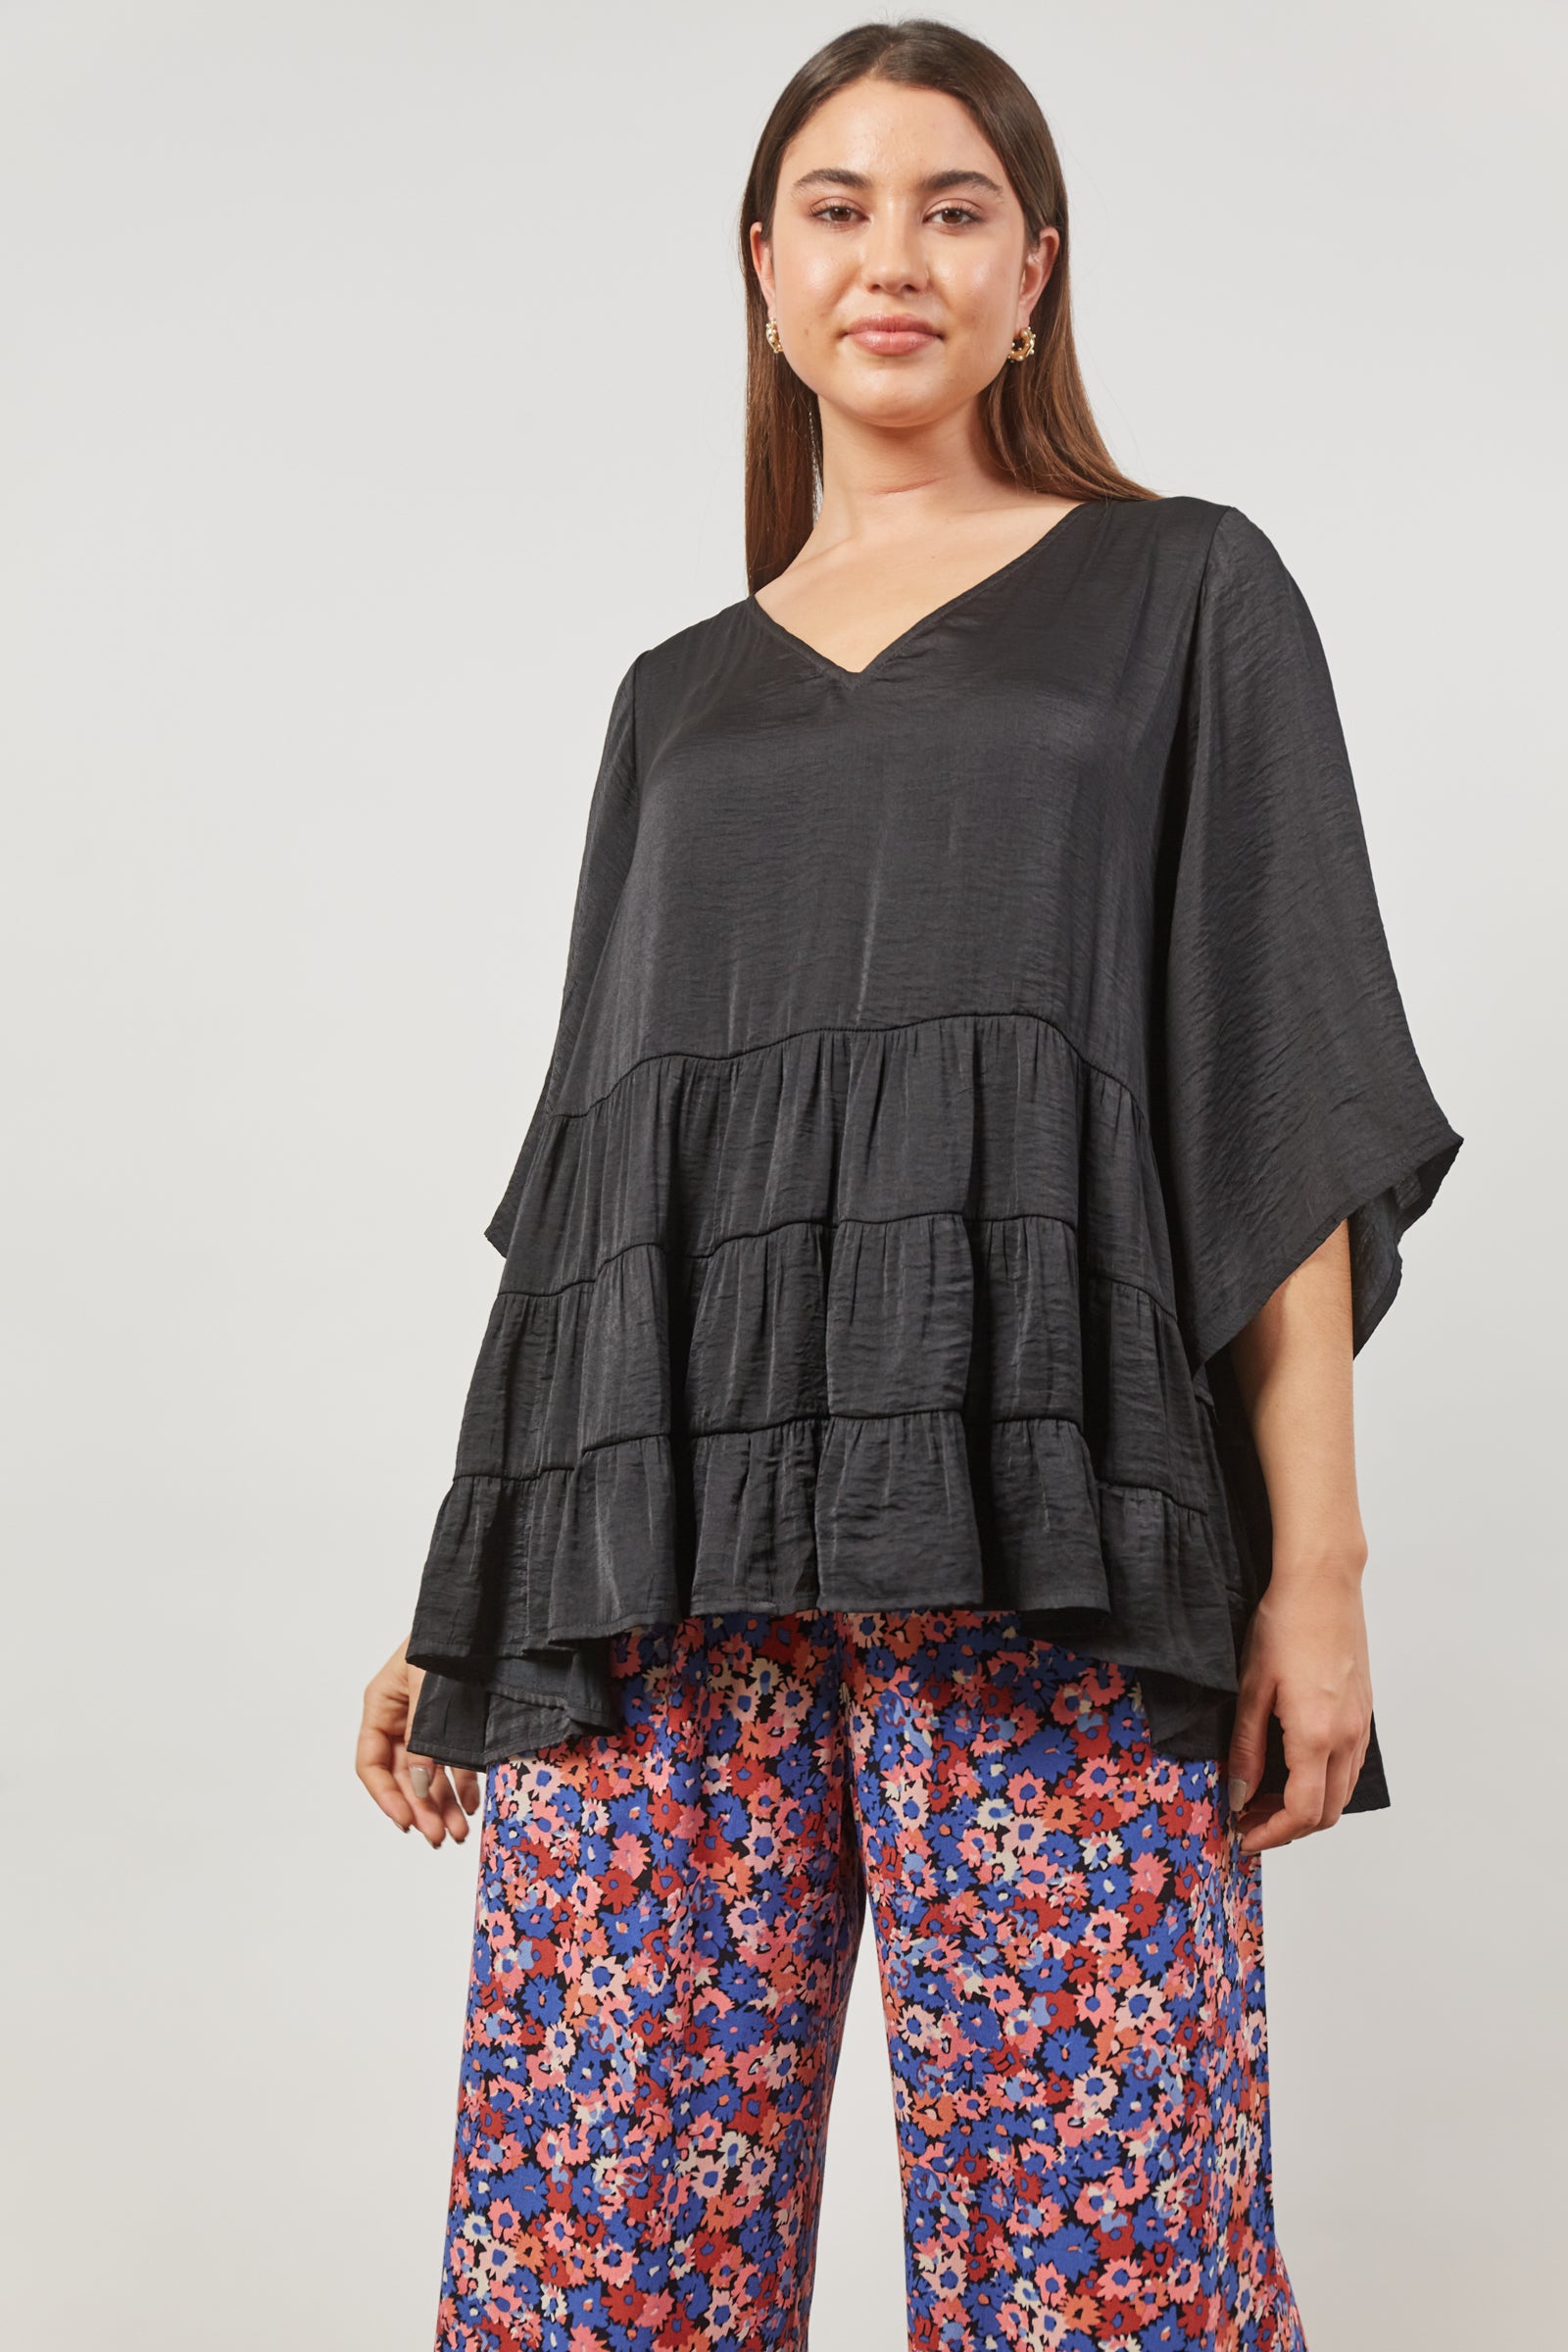 Romance Relax Top - Onyx - Isle of Mine Clothing - Top L/S One Size